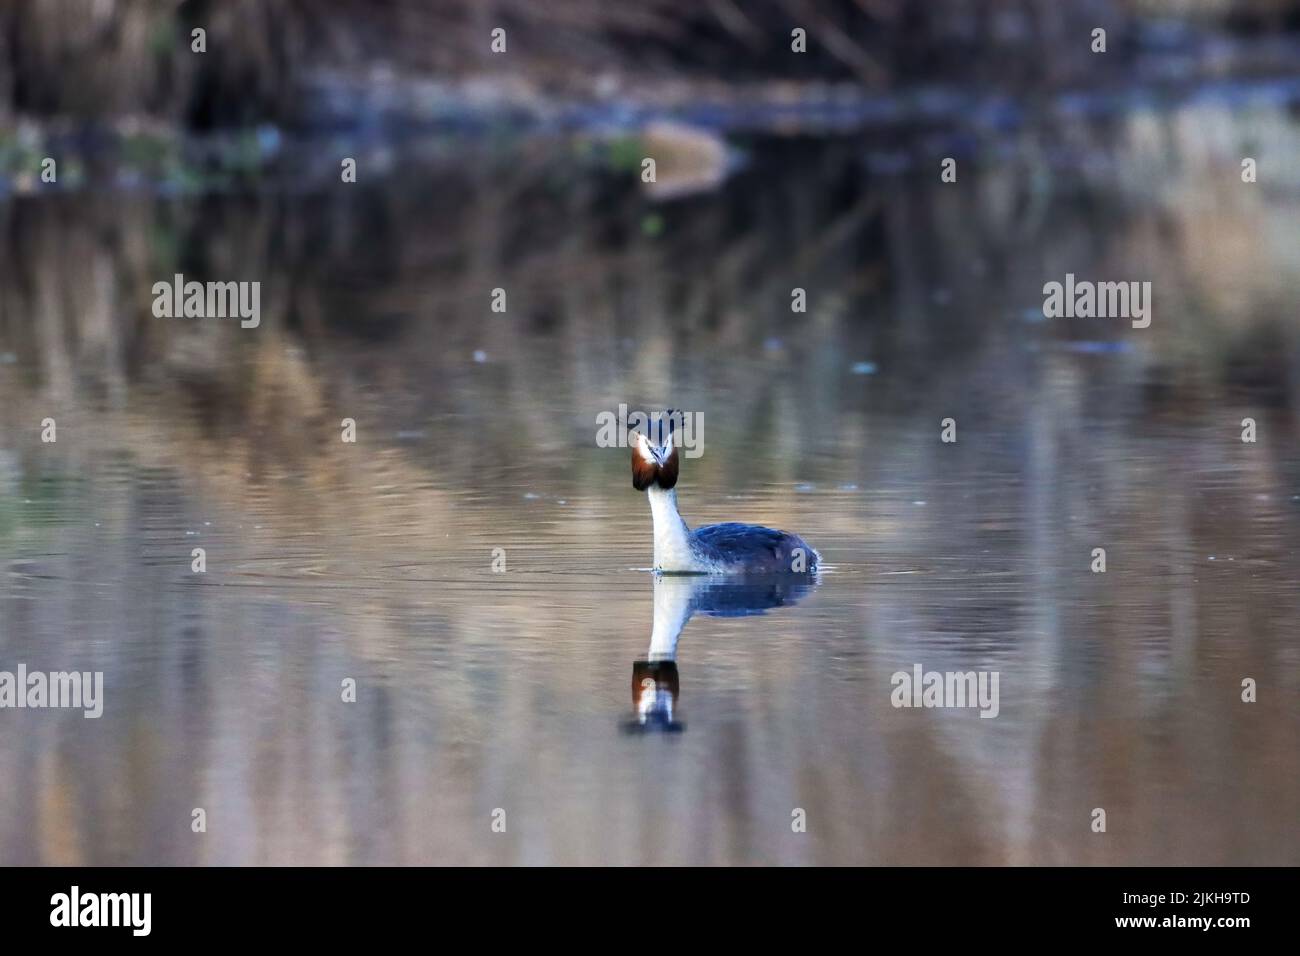 A great crested grebe (Podiceps cristatus) wading in a lake Stock Photo